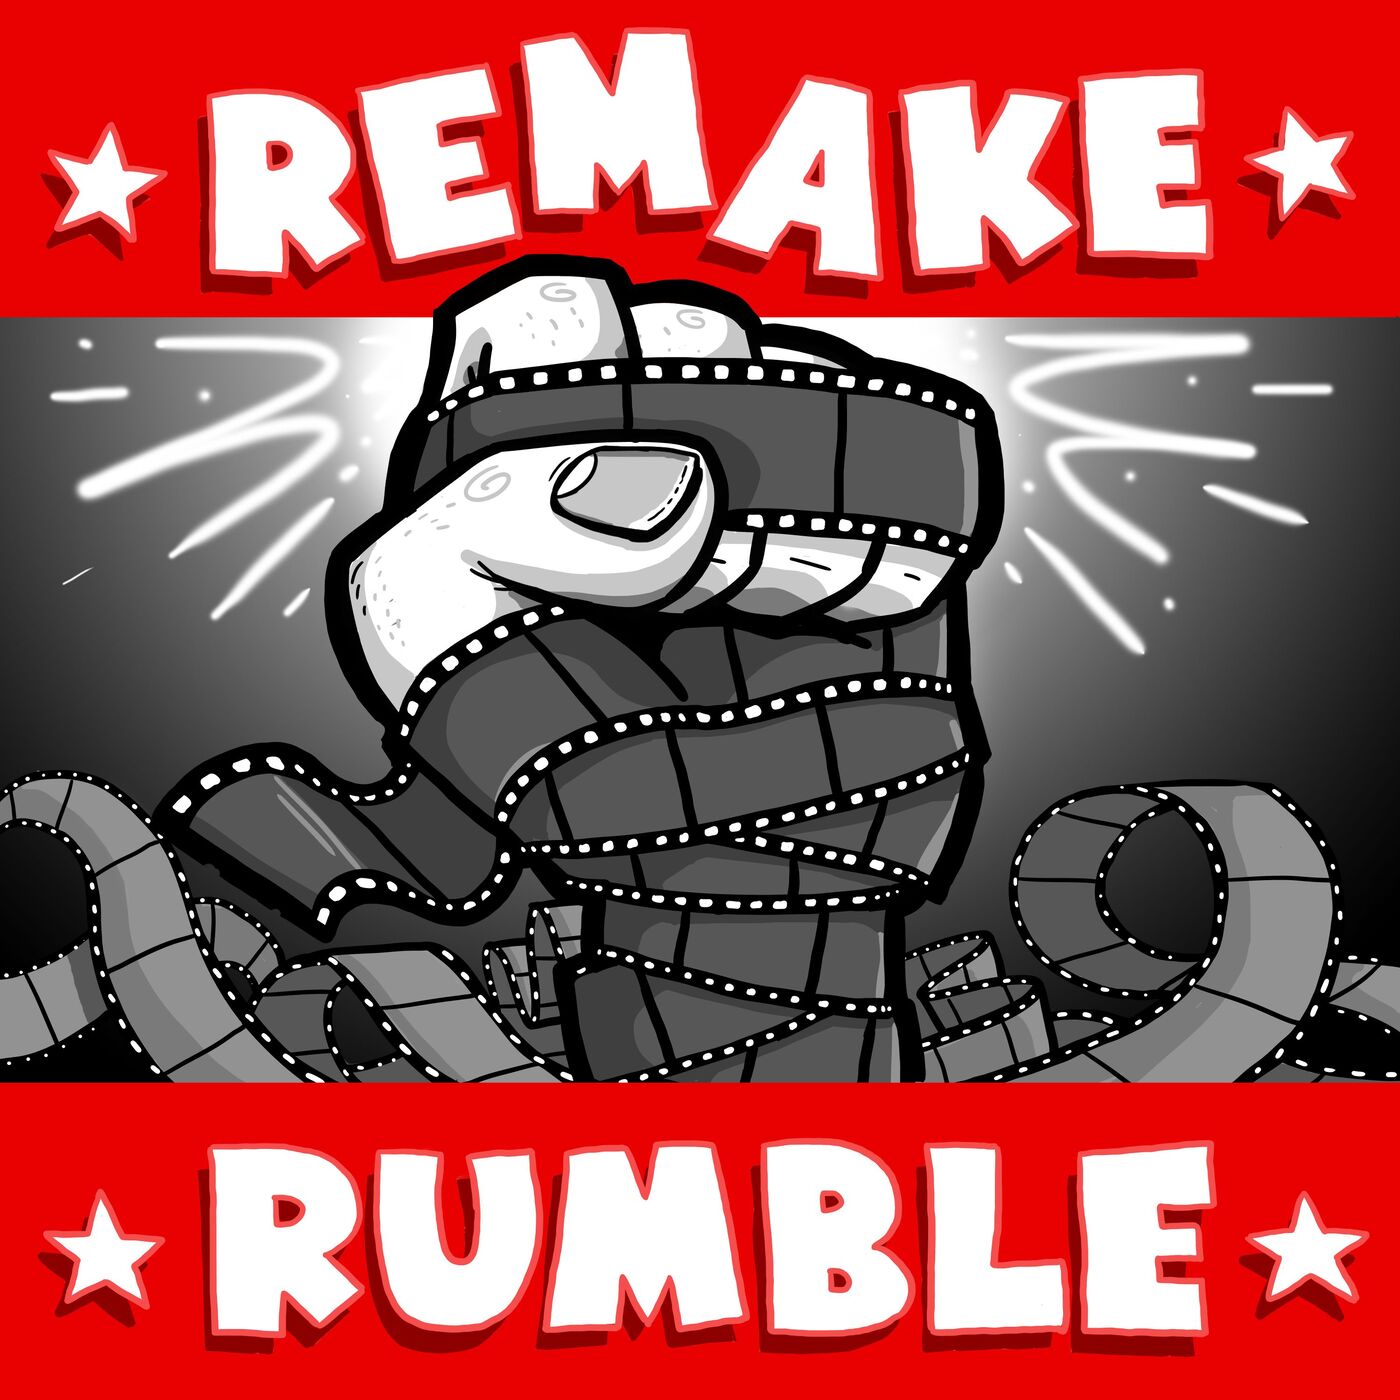 The Lion King (1994) vs The Lion King (2019) | Remake Rumble #1